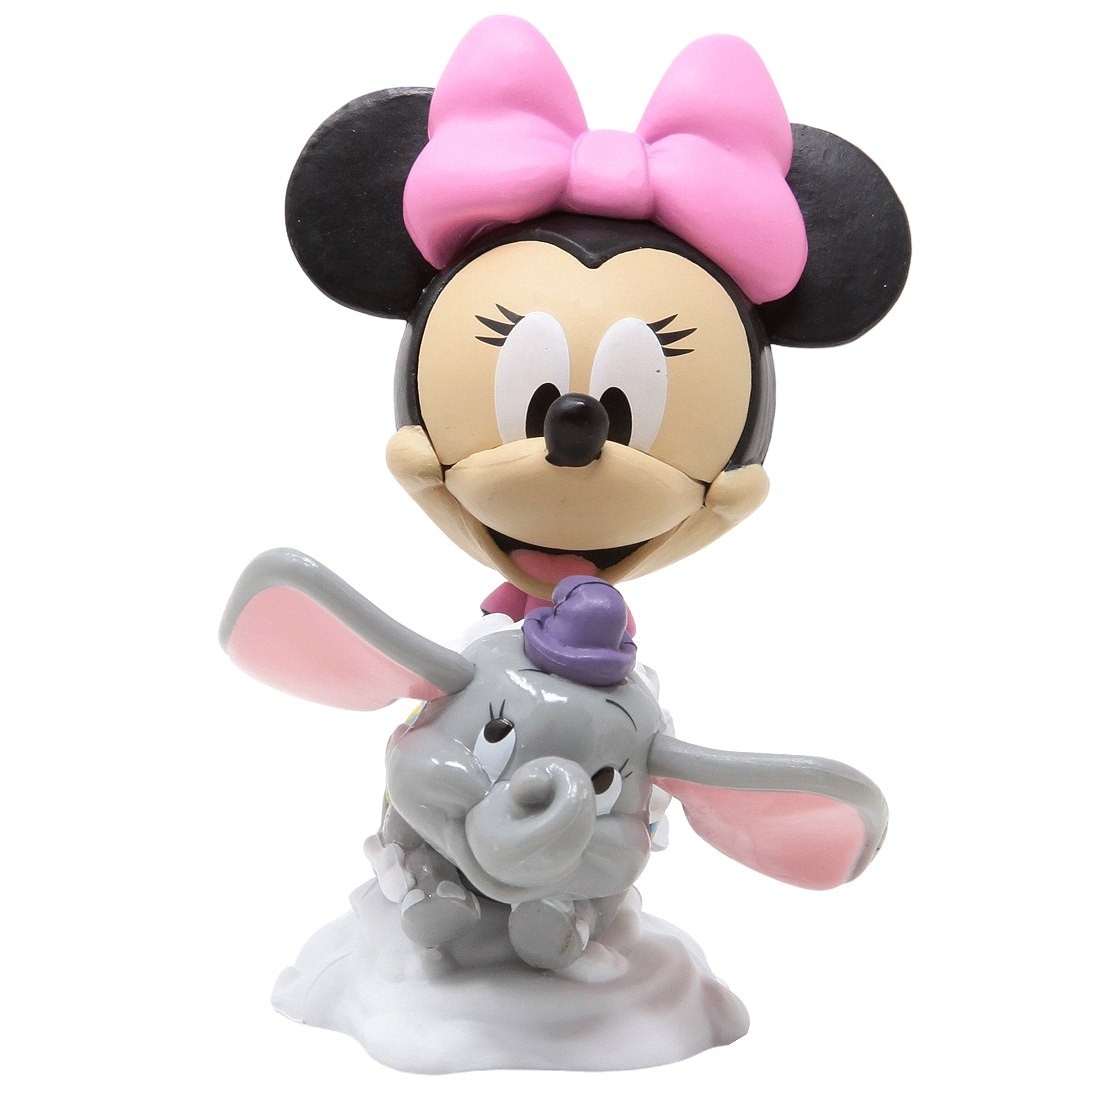 Funko Disney 65th Anniversary Mini Vinyl Figure - 06 Minnie Mouse At Dumbo The Flying Elephant Attraction (pink)